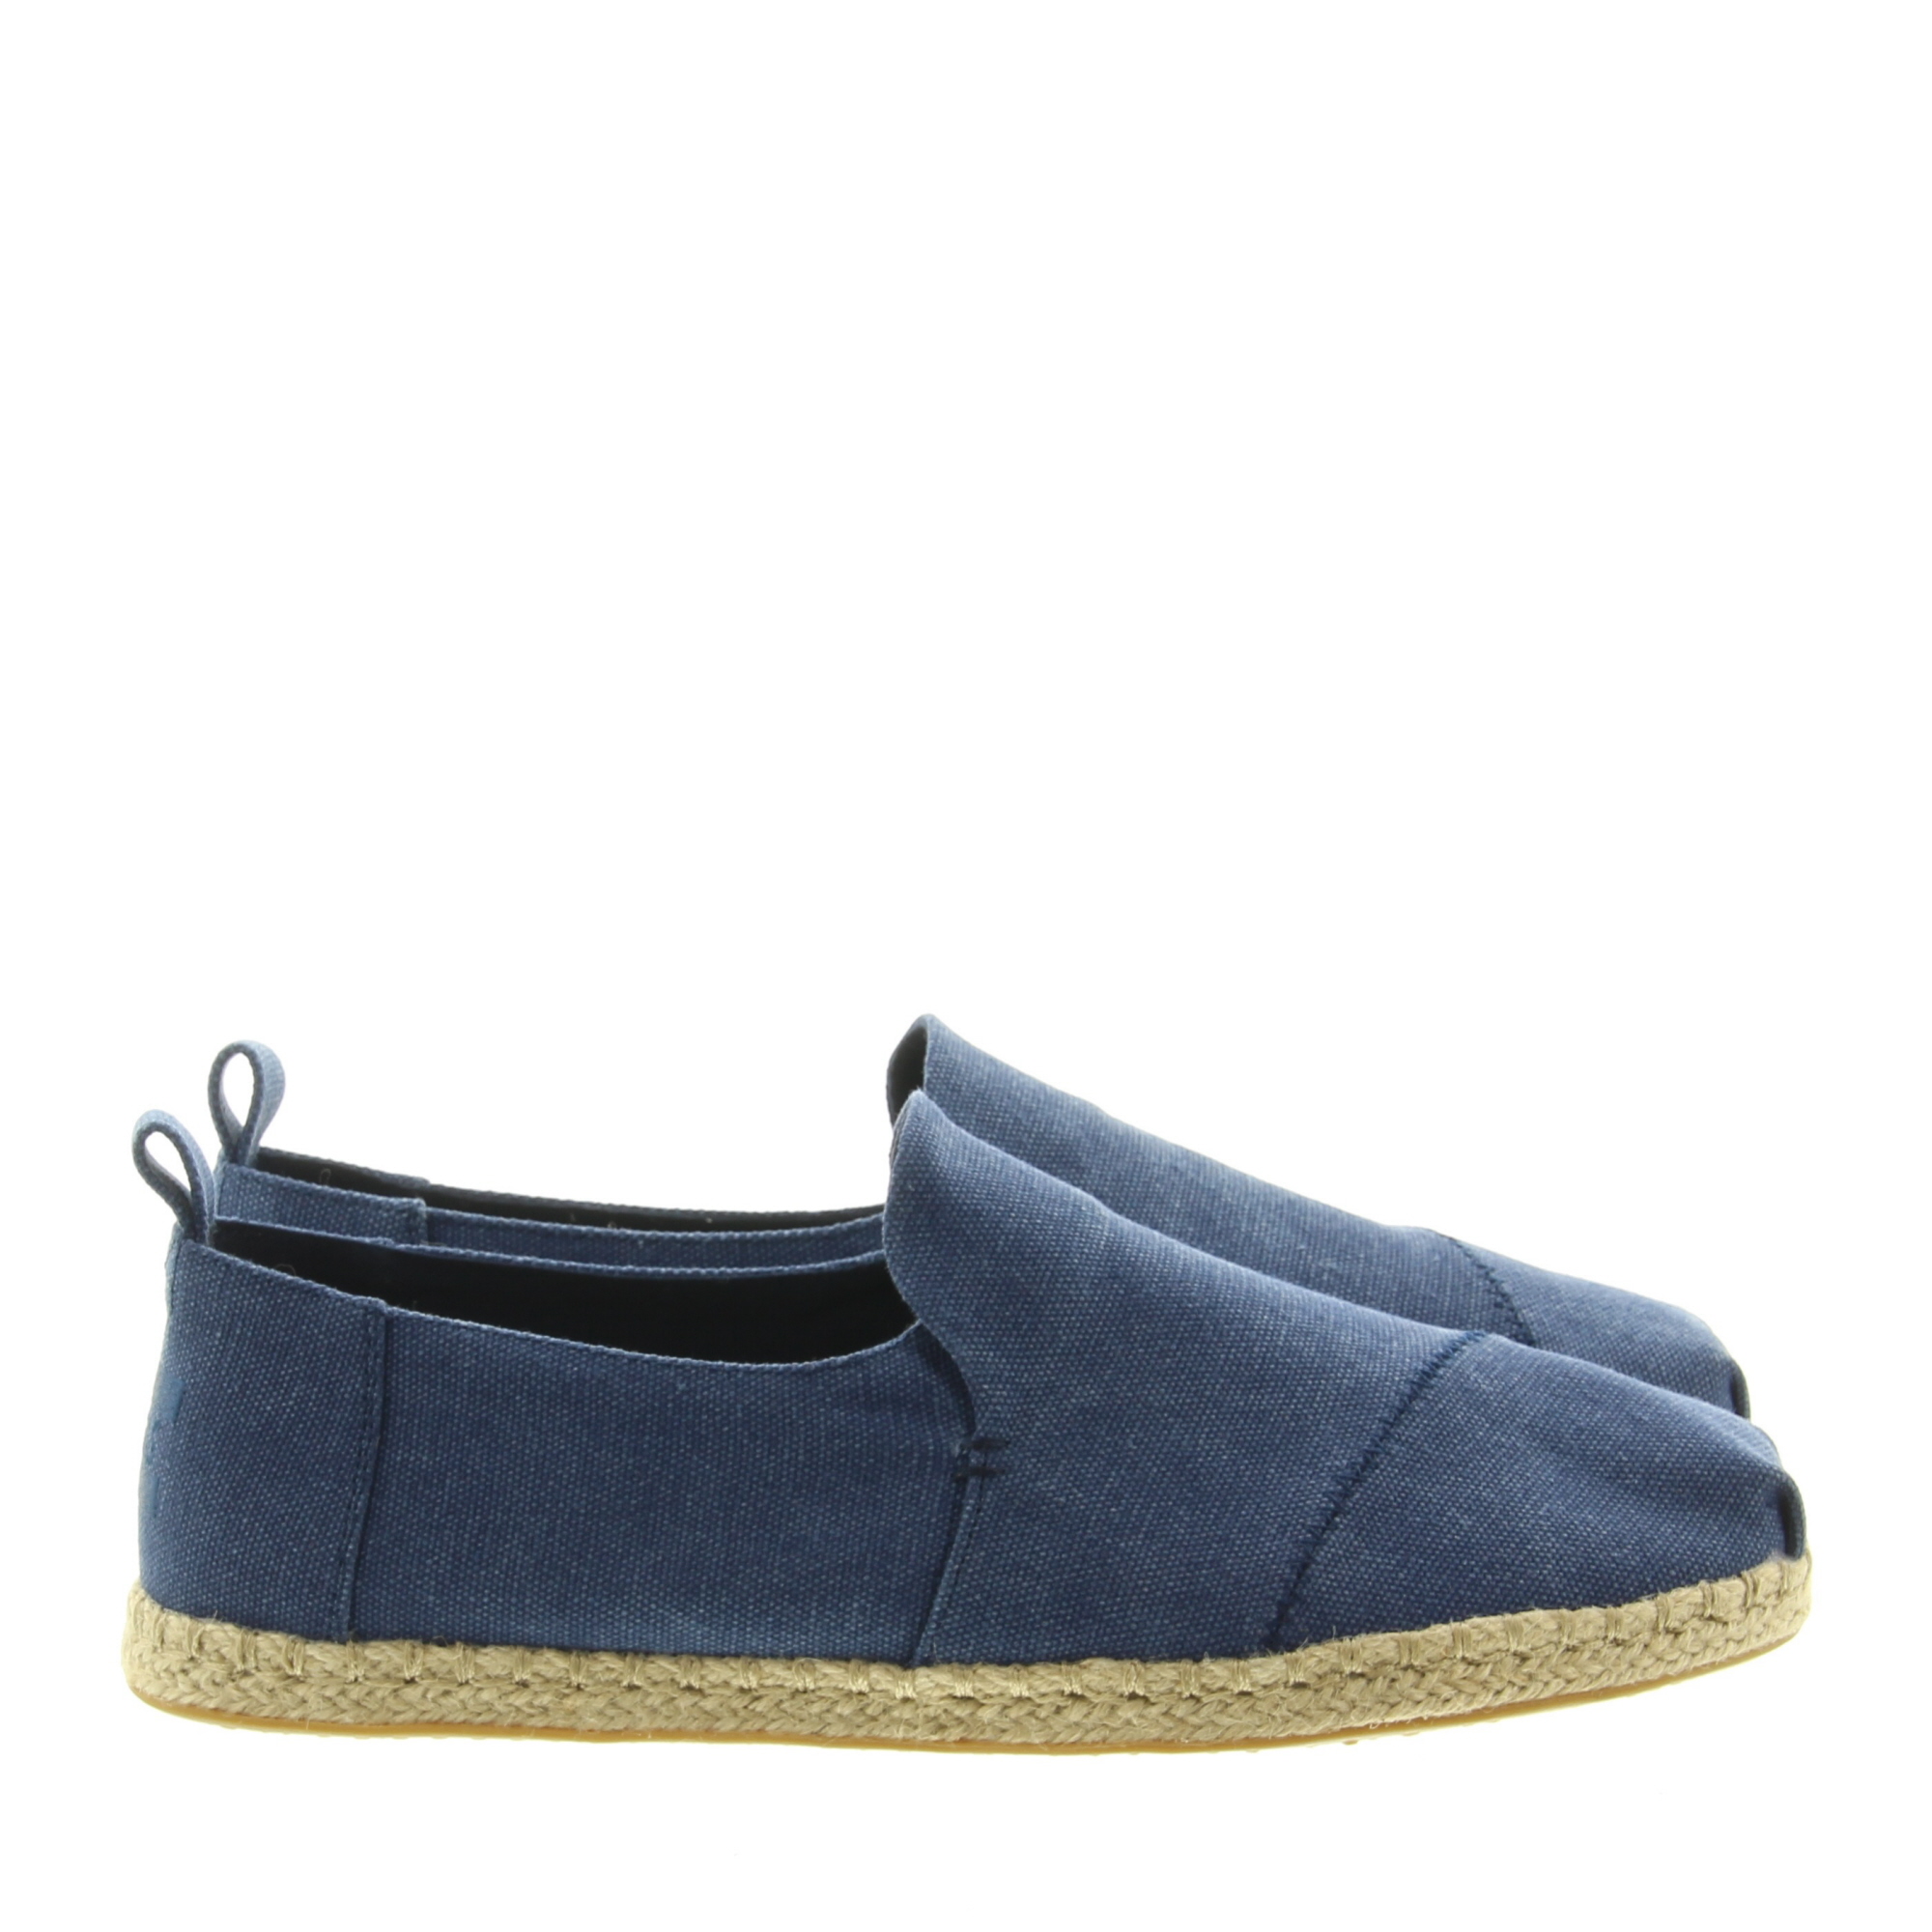 Toms 10011623 Decons.Alpargata Rope Navy Washed Canvas